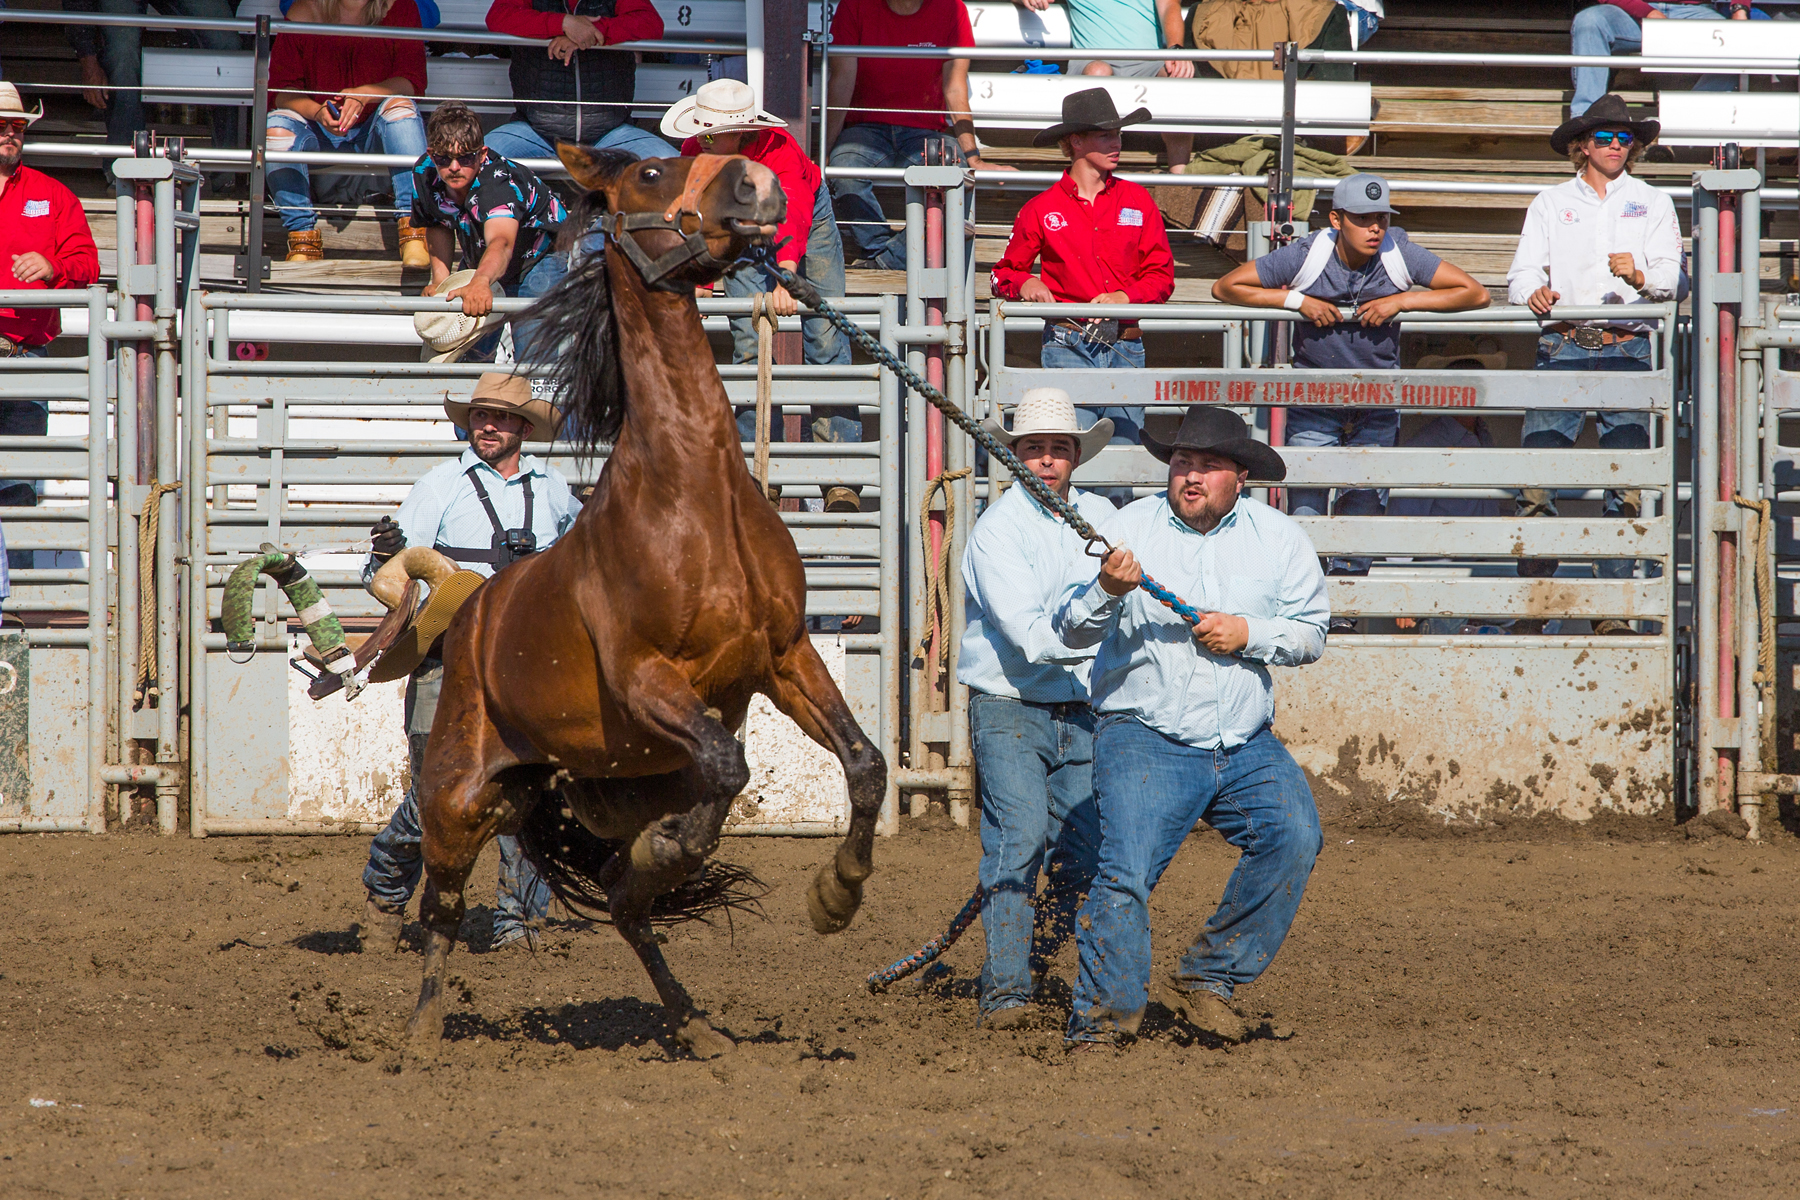 Wild horse racing at Home of Champions Rodeo, Red Lodge, MT, July 4, 2021.  Click for next photo.